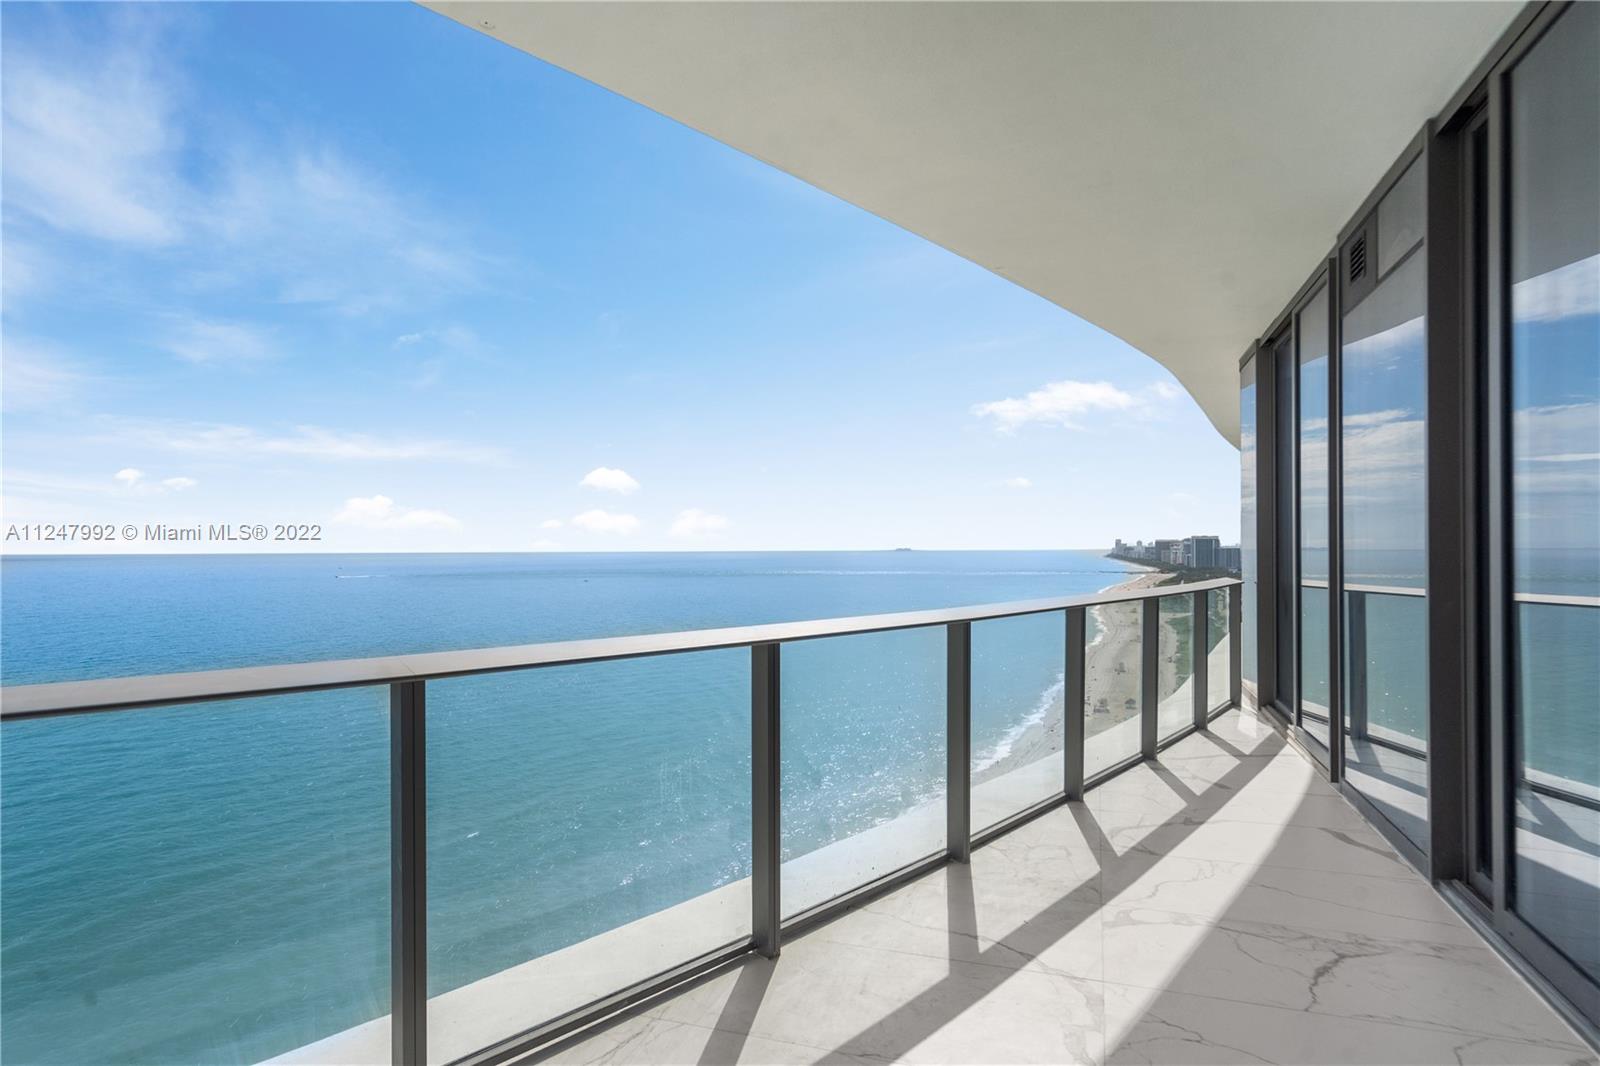 Magnificent luxury residence in the Ritz Carlton in Sunny Isles! Breathtaking ocean and city views, spacious 2 bedrooms plus 2.5 bathrooms with private elevator & foyer. Top of the line appliances, cappuccino maker, wine cooler, 10ft ceilings, Snaidero Kitchen furniture. Move in ready at the brand new Ritz-Carlton Residences in Sunny Isles. Enjoy panoramic sunrise & sunset views from two terraces. Amenities include a sky lounge exclusively for residents, 2 pools, fitness center, guest suites, restaurant, beach service and 250 linear feet of pristine beachfront. Hospitality provided by the incomparable Ritz-Carlton! Unit will be delivery fully finished Brand New with Porcelains Calacatta floors, electrical blinds and customized closets!!!